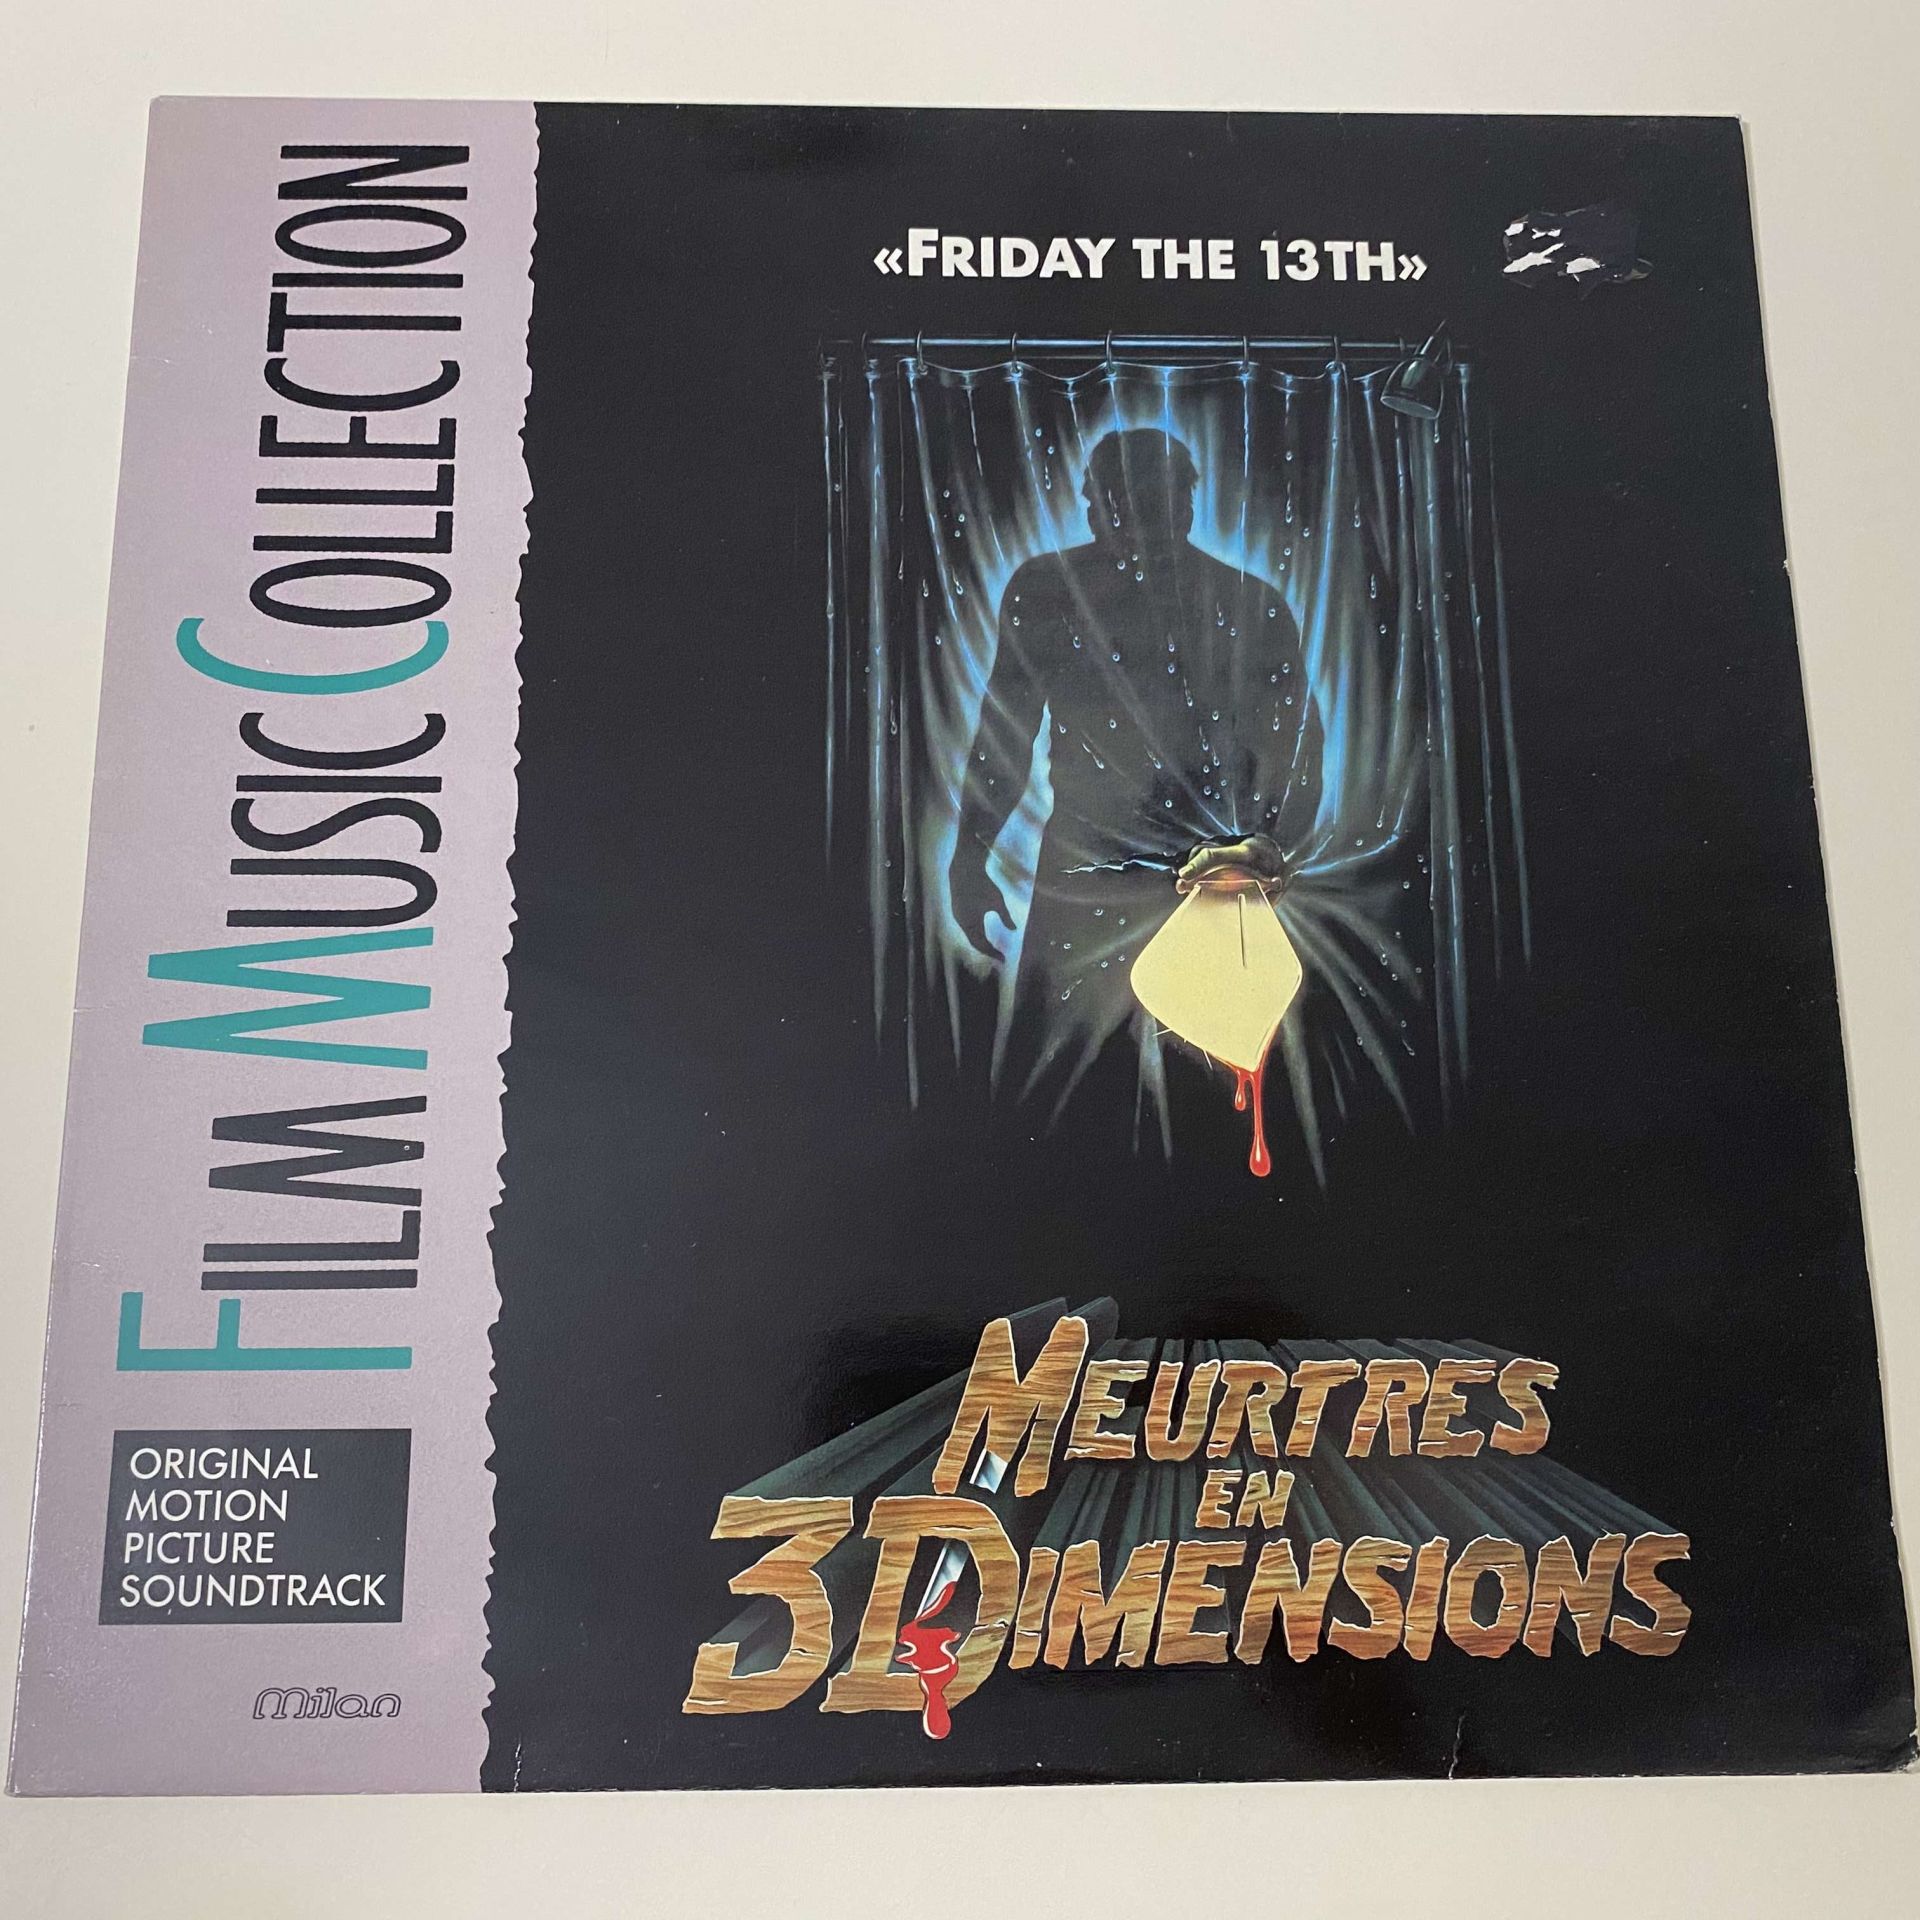 Harry Manfredini And Michael Zager – Friday The 13th: Meurtres En 3 Dimensions (Original Motion Picture Soundtrack)